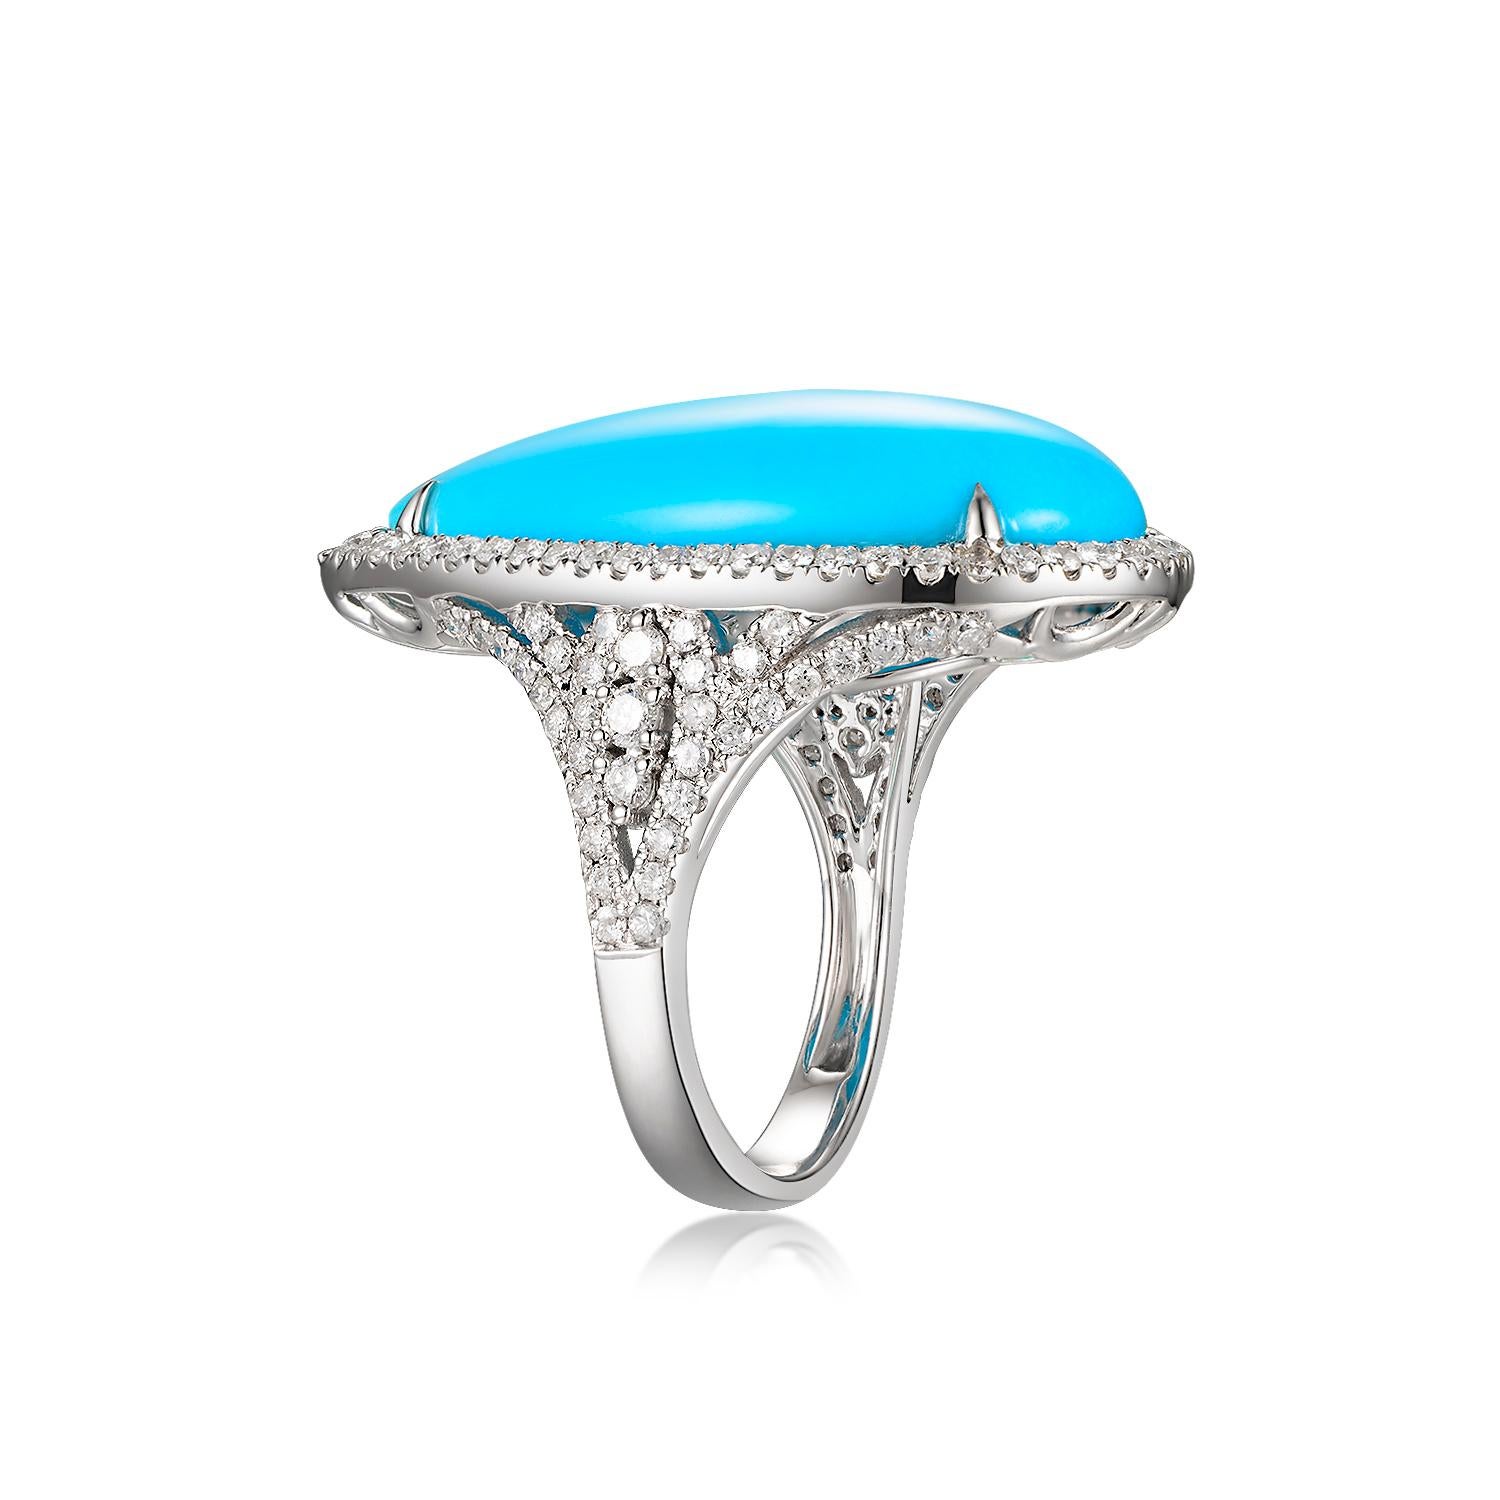 This ring features a pear cut sleeping beauty turquoise (14.9mm x 26.74mm) weight 17.64 carats in a single diamond. The diamond halo and the shoulder totaling 1.11 carat of round cut diamonds. All turquoise use in production are from the prominent